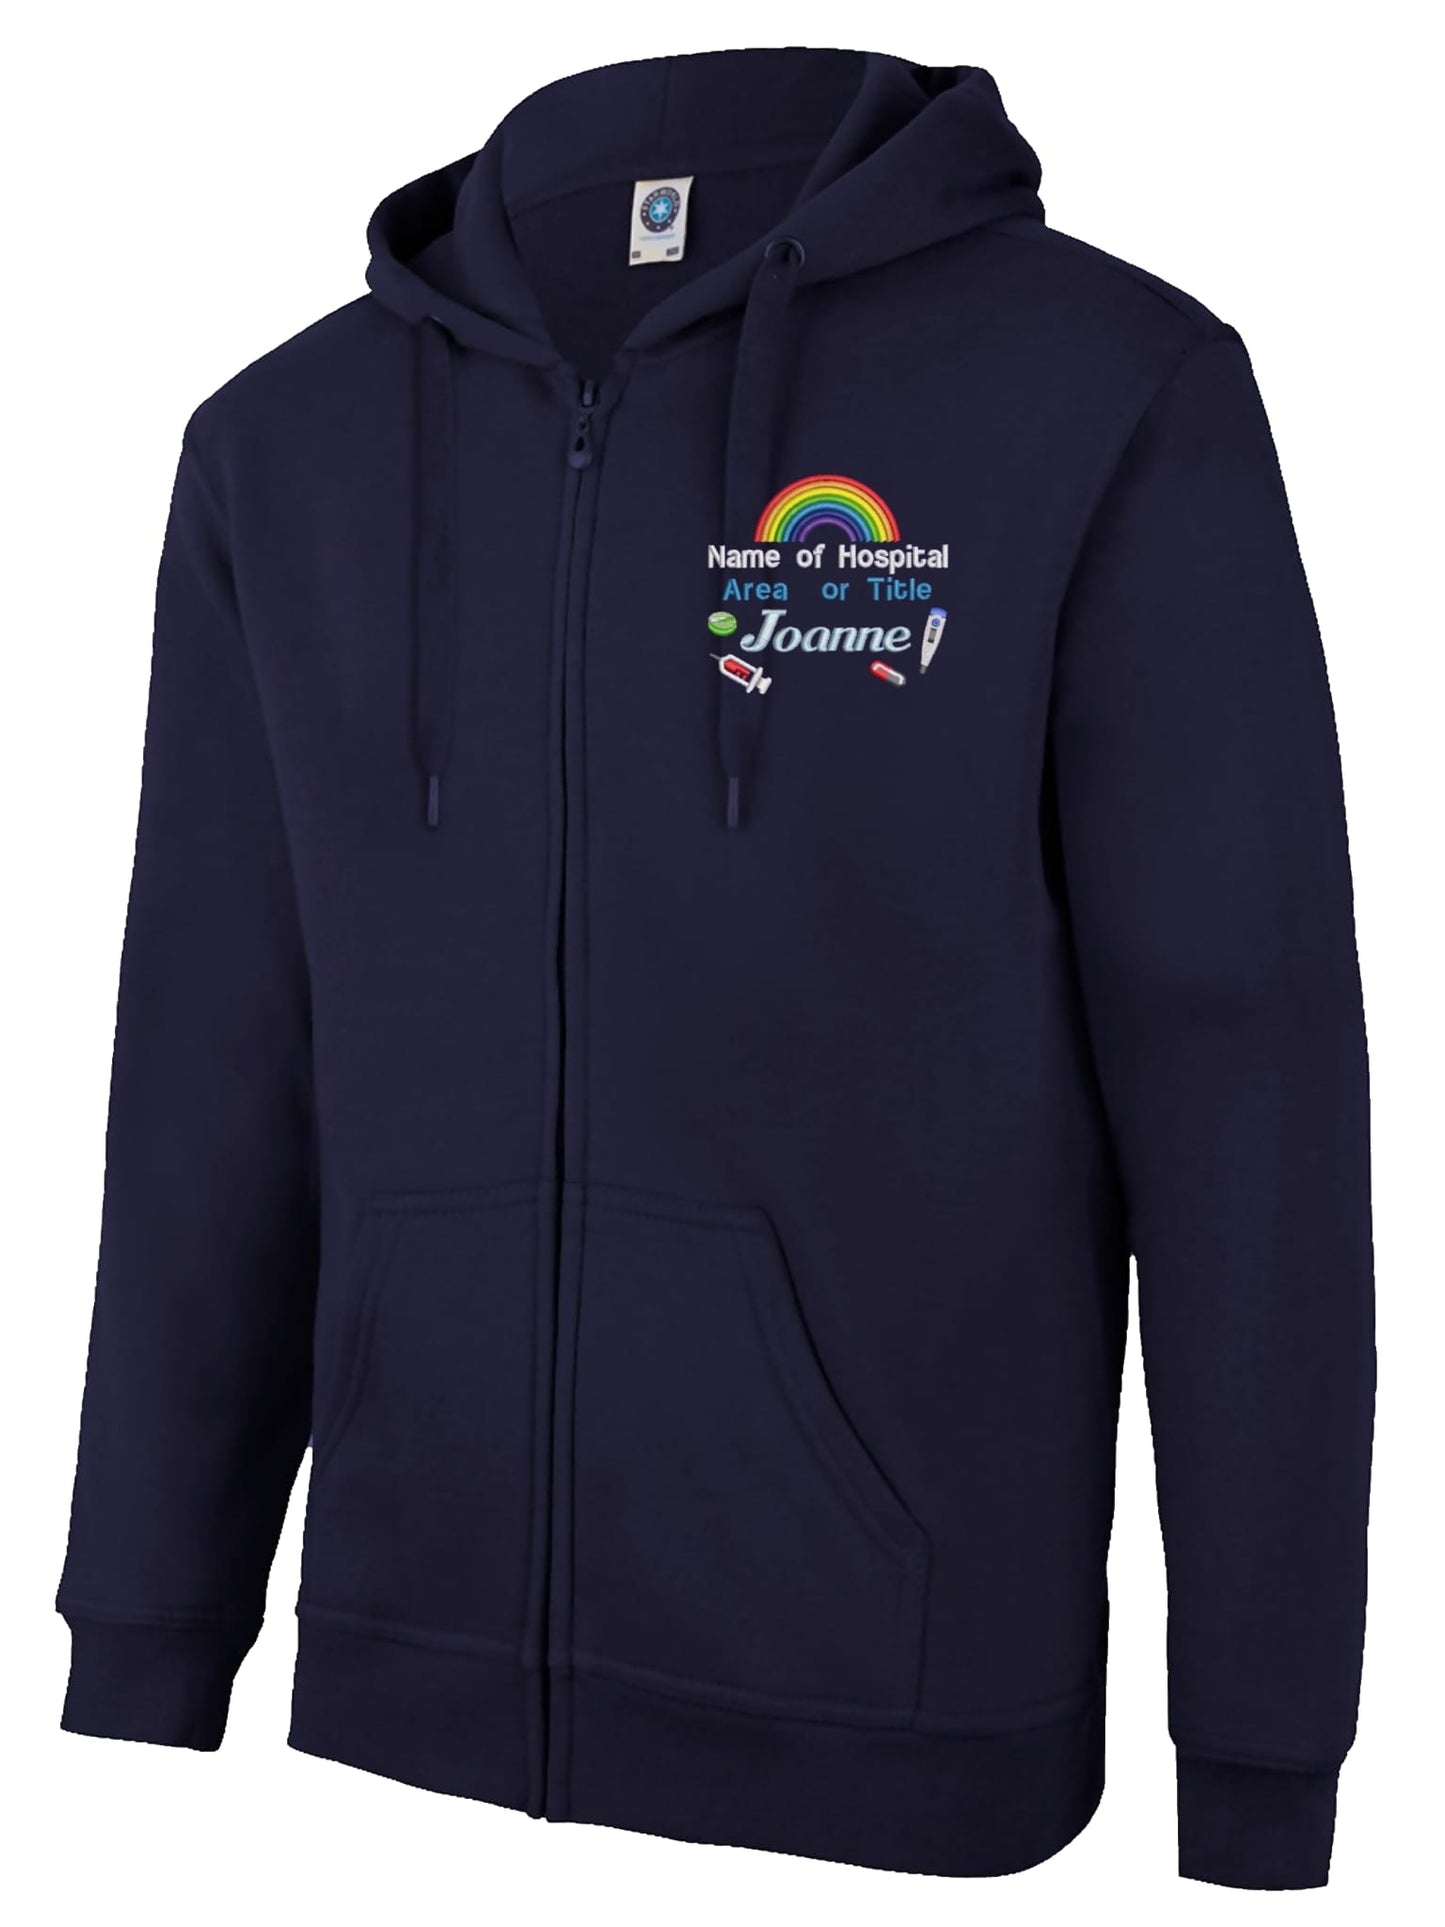 Personalised Hoodie Jackets With Thermometer, Injection & Pills Embroidery Design Accents